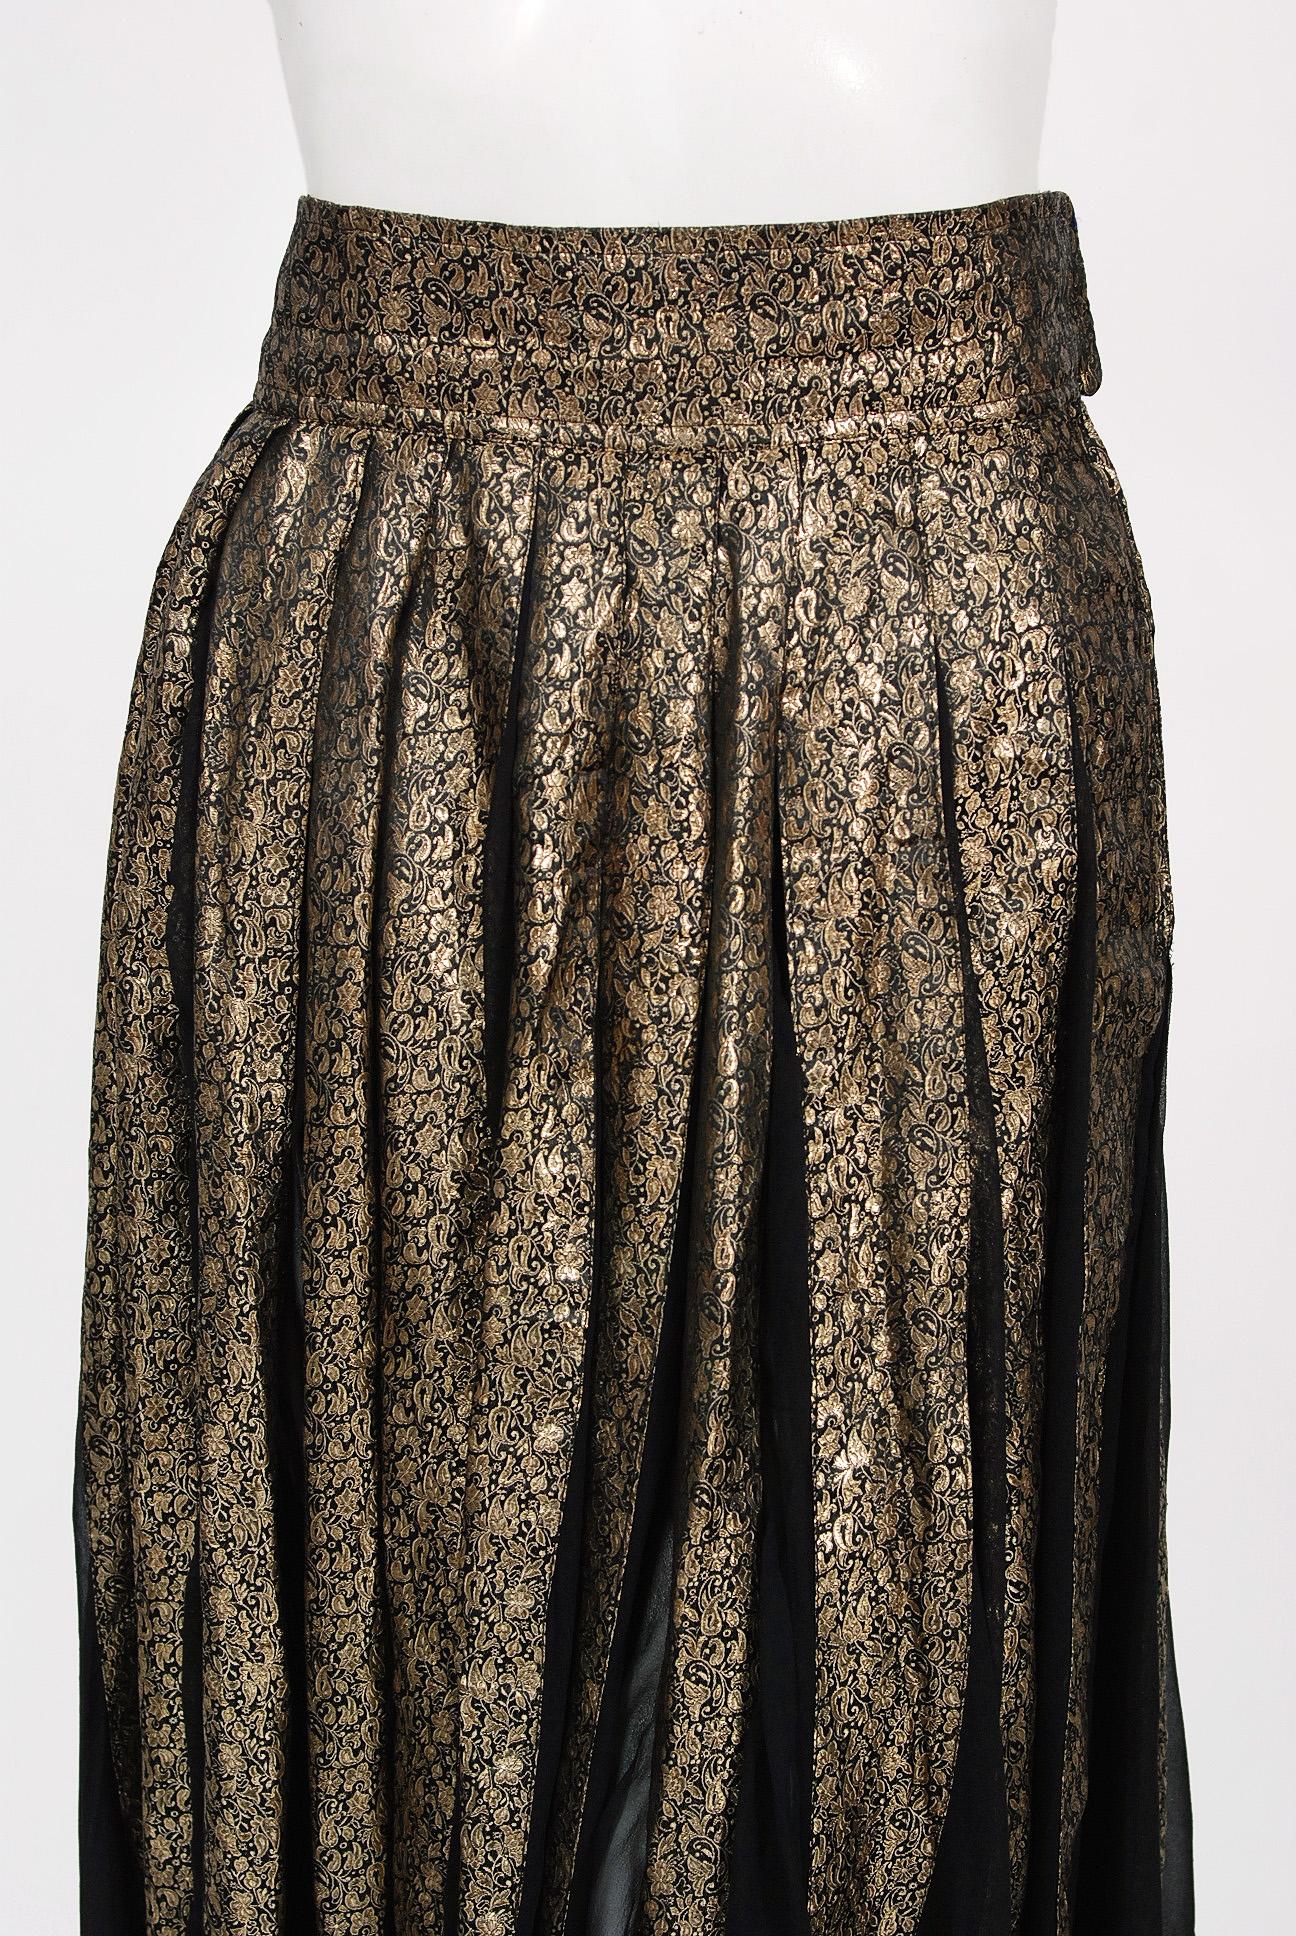 Vintage 1970's Thea Porter Couture Gold Lamé and Black Sheer Silk Bohemian Skirt 2